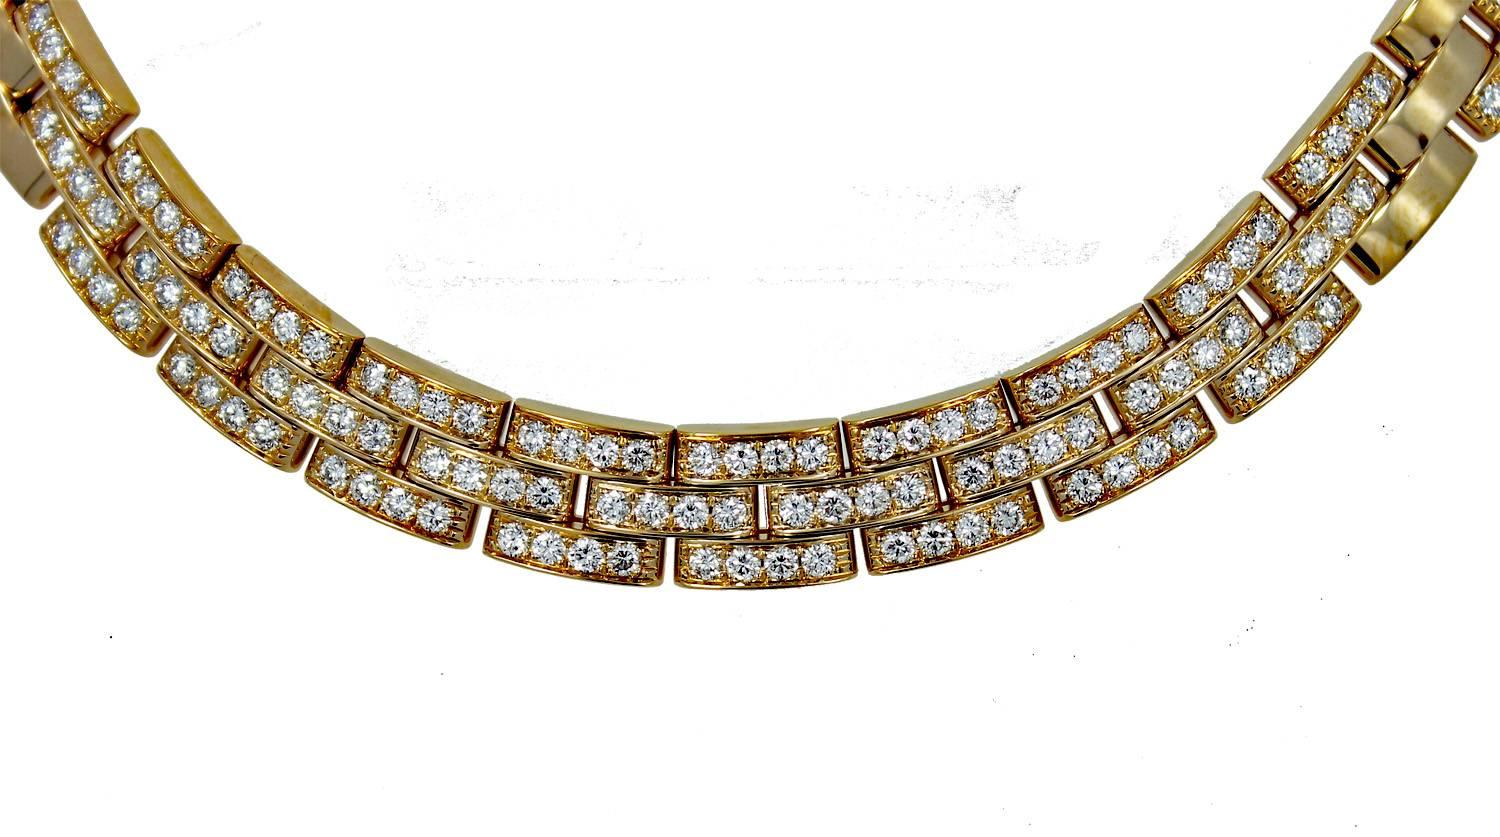 Cartier 18K Yellow Gold Maillon Panthere Neckclace. This iconic necklace is the 3 rows of interlocking links with 228 Round Brilliant Cut Diamonds which equal  approximately of 6.00 carats and are F color and VVS Clarity.  The Necklace comes with